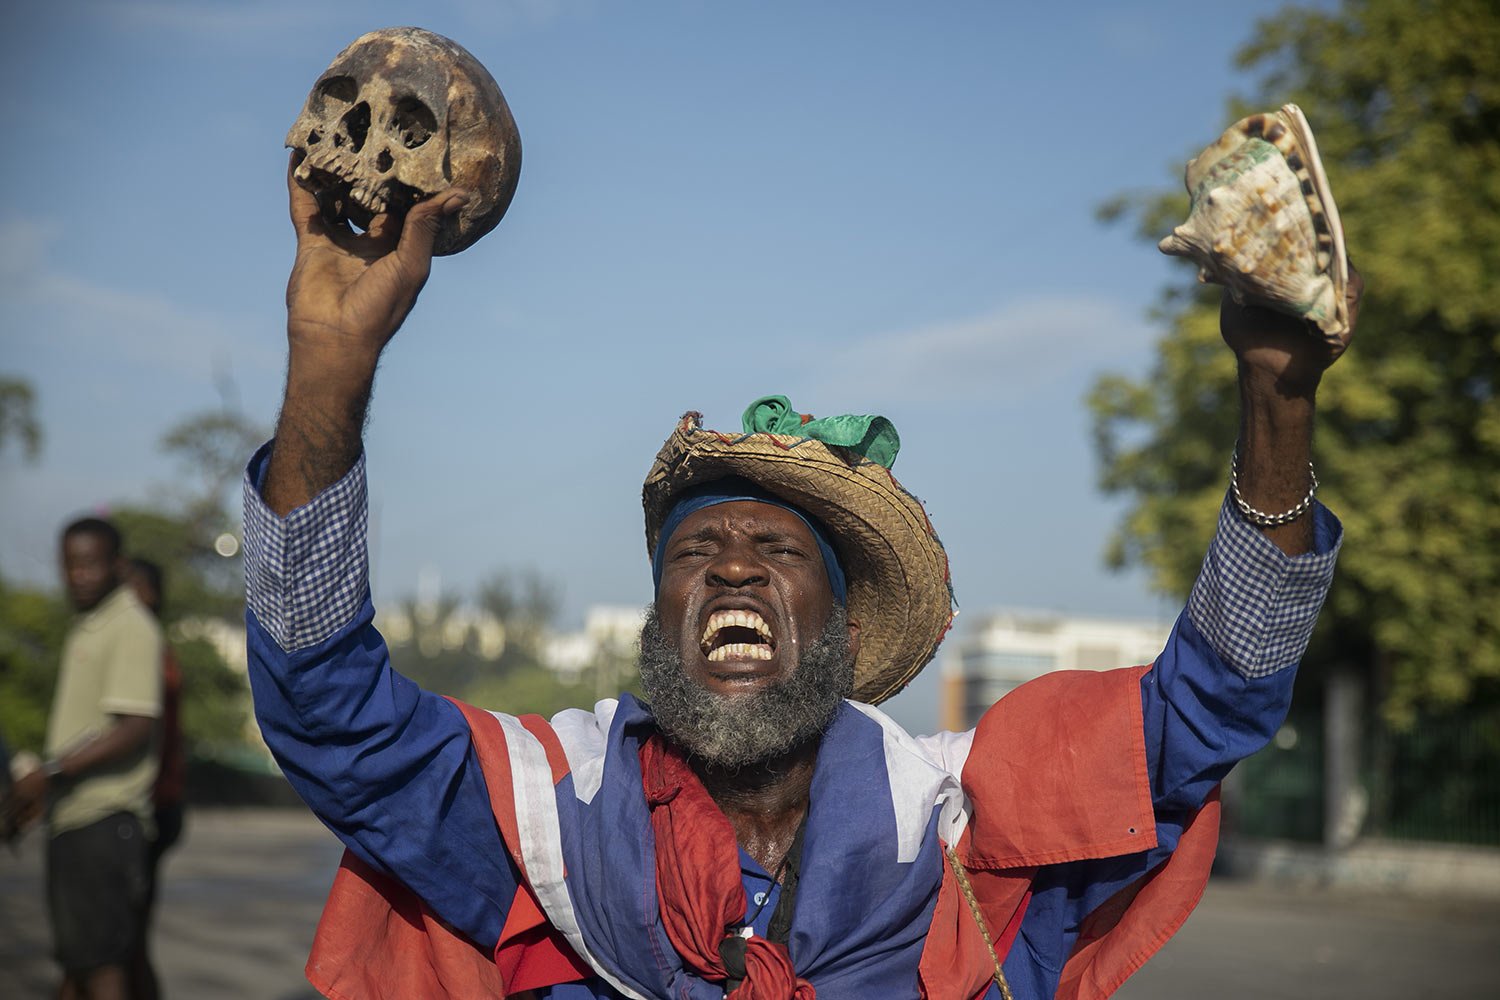  A protester holding up a skull and seashell shouts for the resignation of Haitian Prime Minister Ariel Henry in the street in the Champs de Mars area where the prime minister attended a ceremony marking the death anniversary of revolutionary leader 